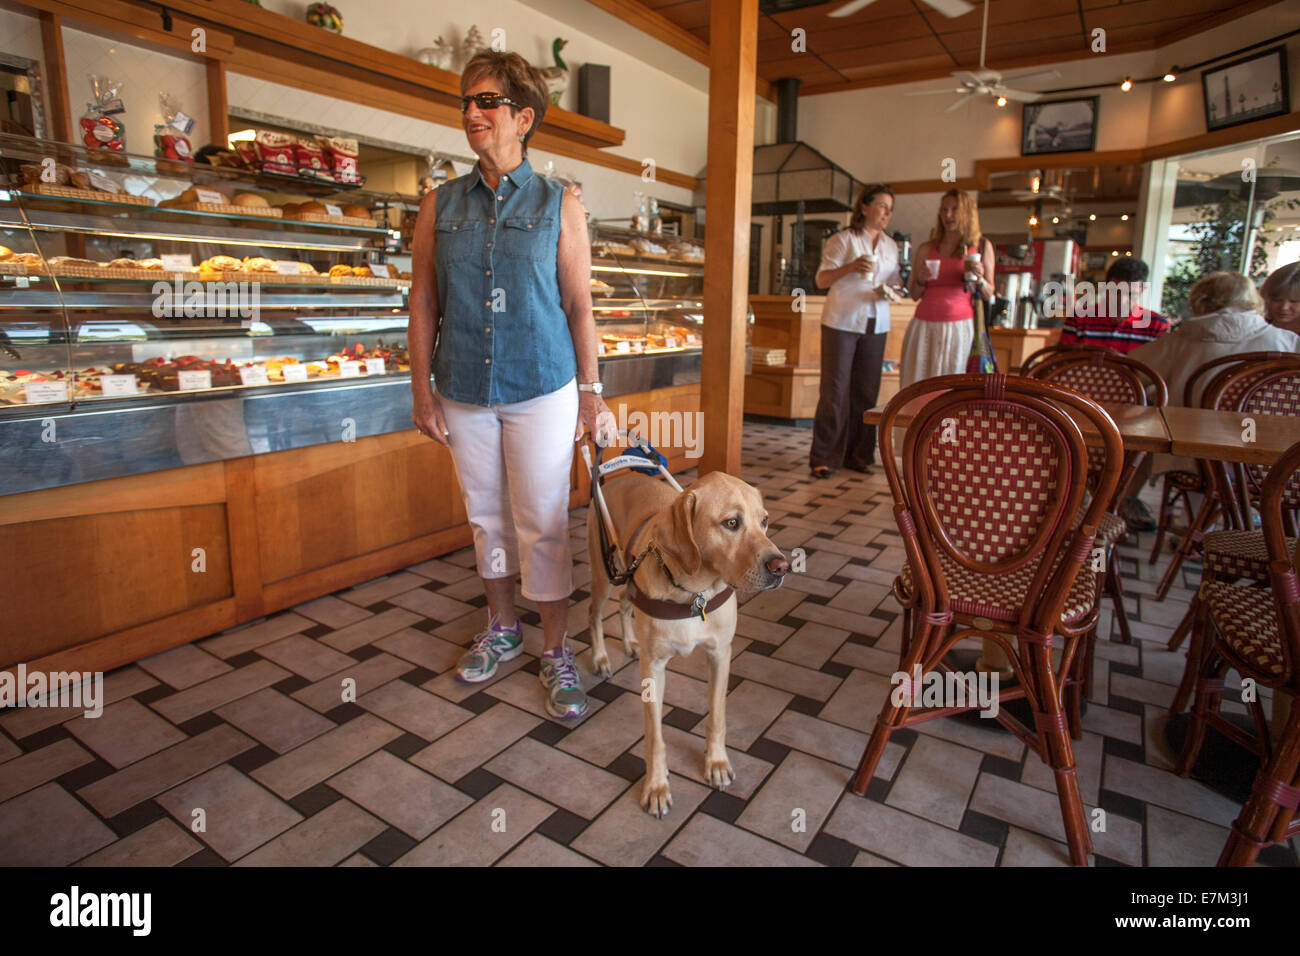 Lead by her yellow Labrador retriever guide dog, a blind woman visits a restaurant in suburban Irvine, CA. Guide dogs are legally permitted in restaurants. Note special harness. Stock Photo